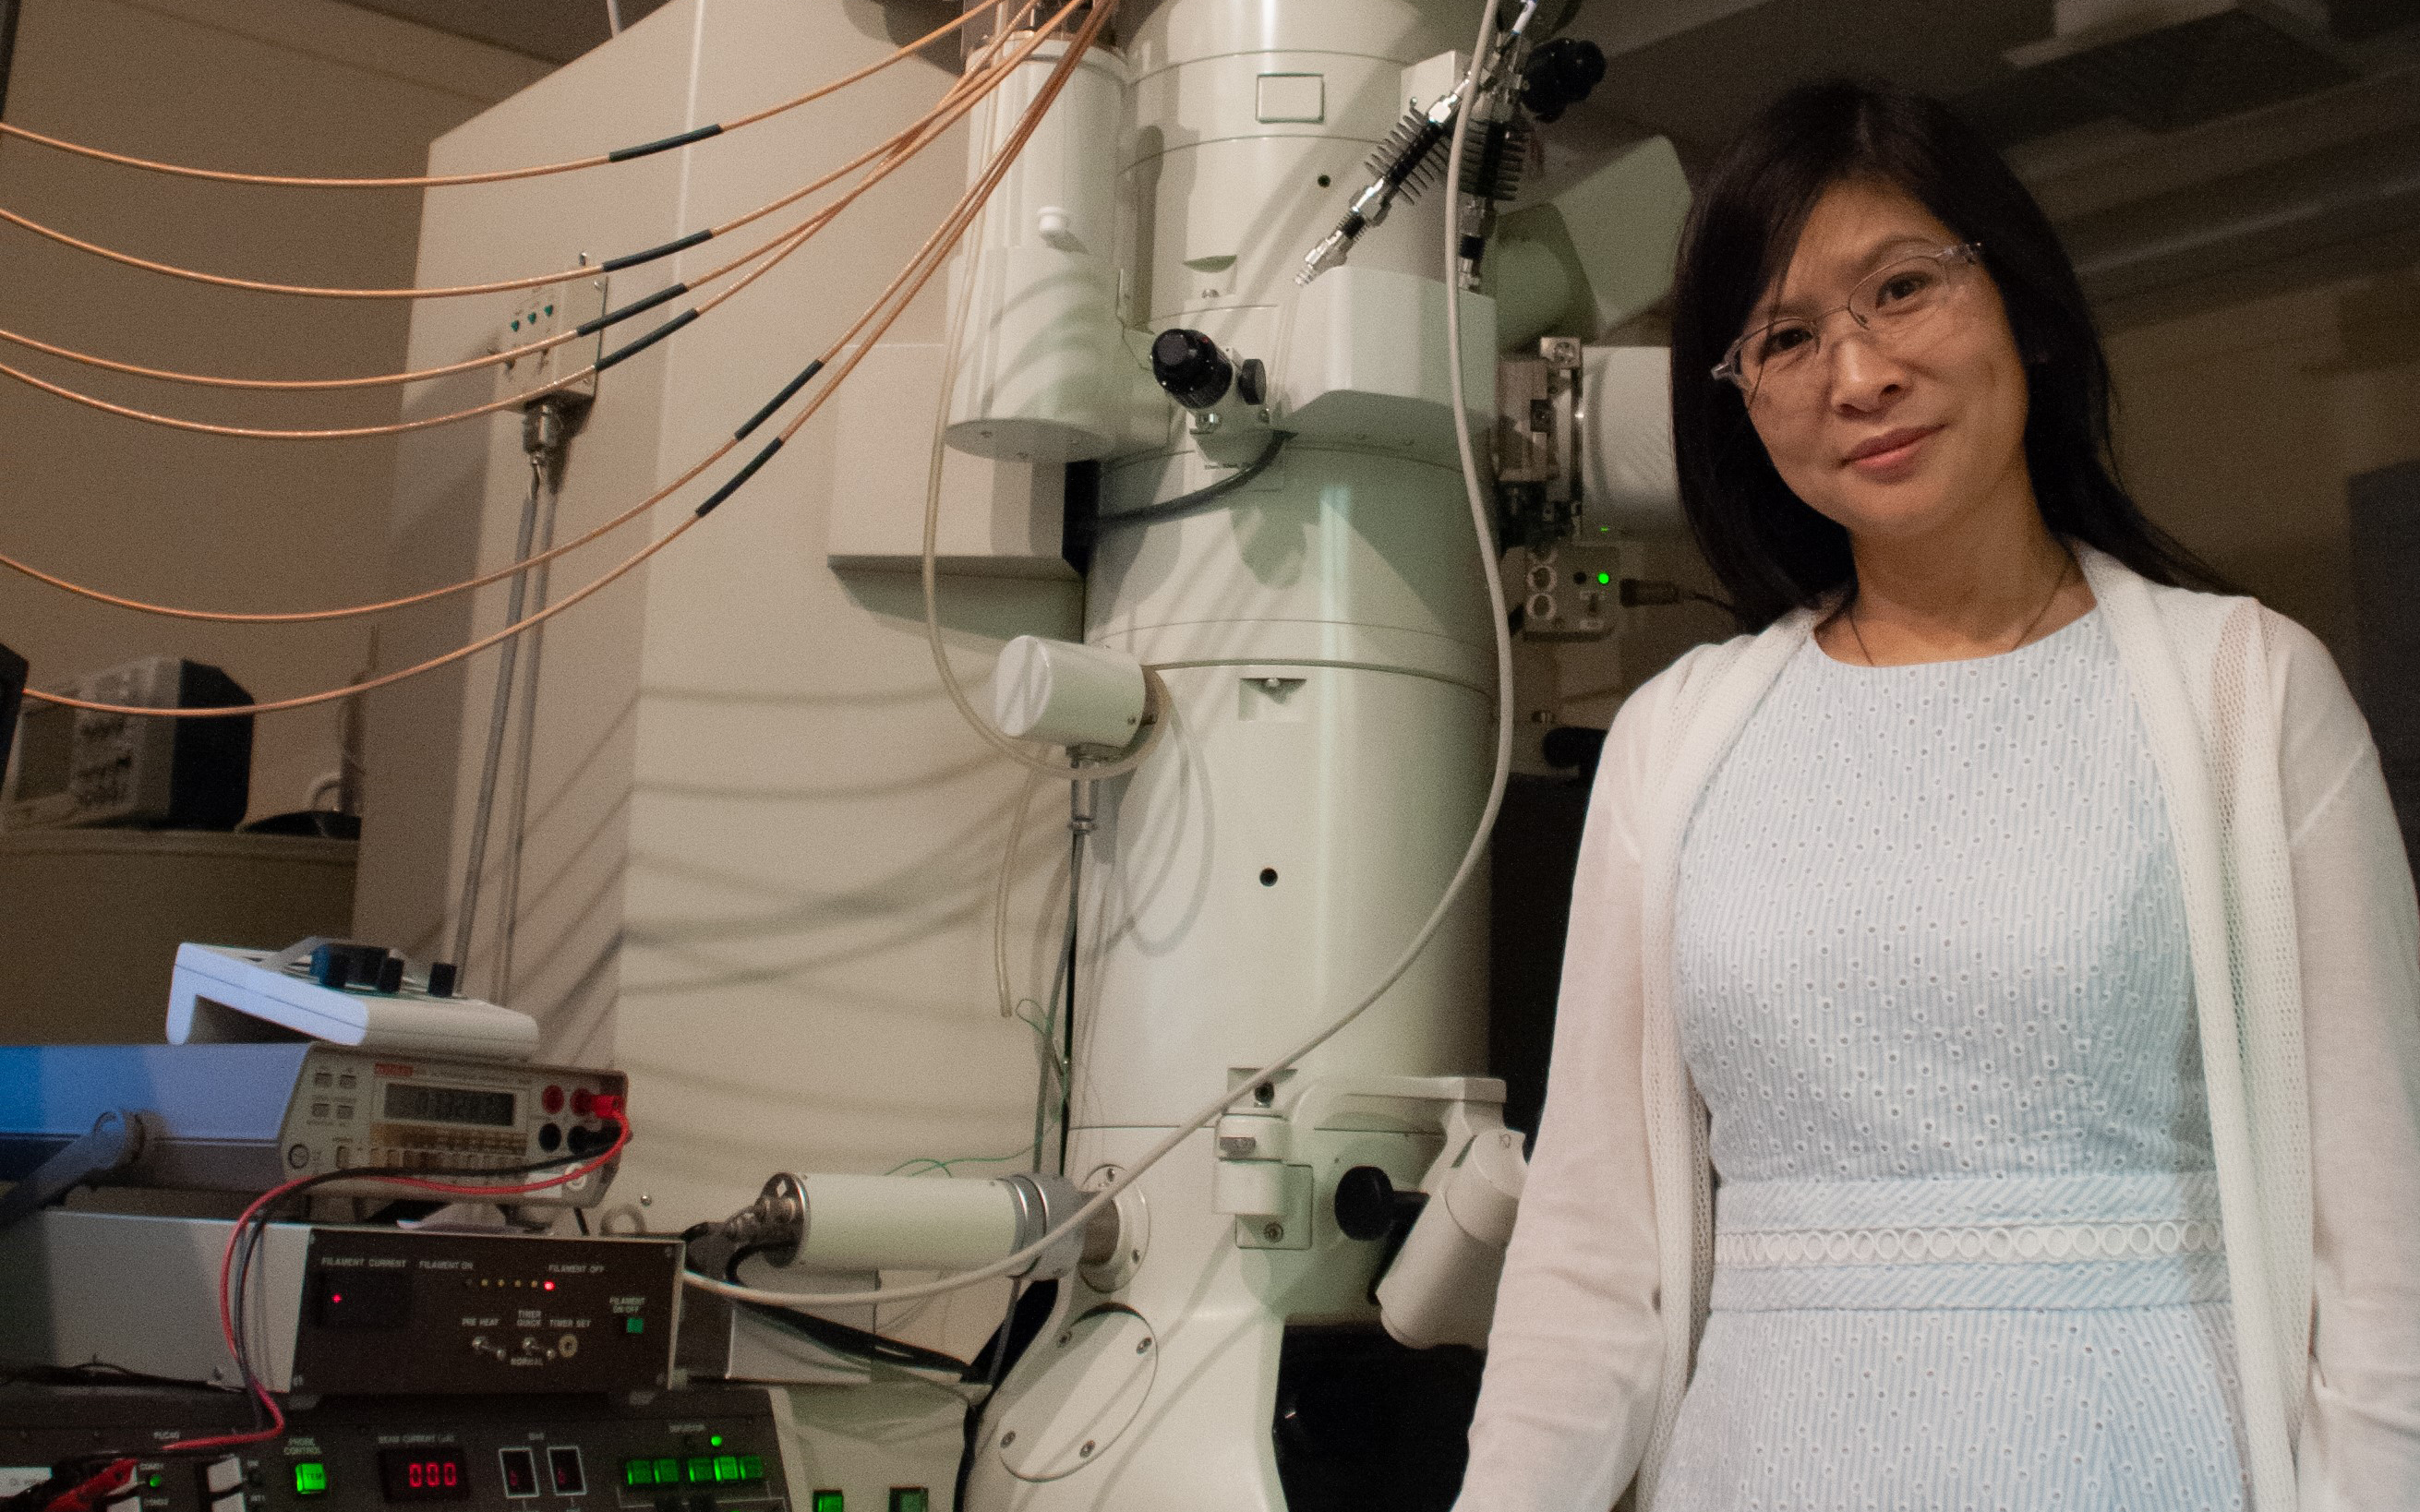 woman in a blue dress and white sweater stands next to an electron microscope